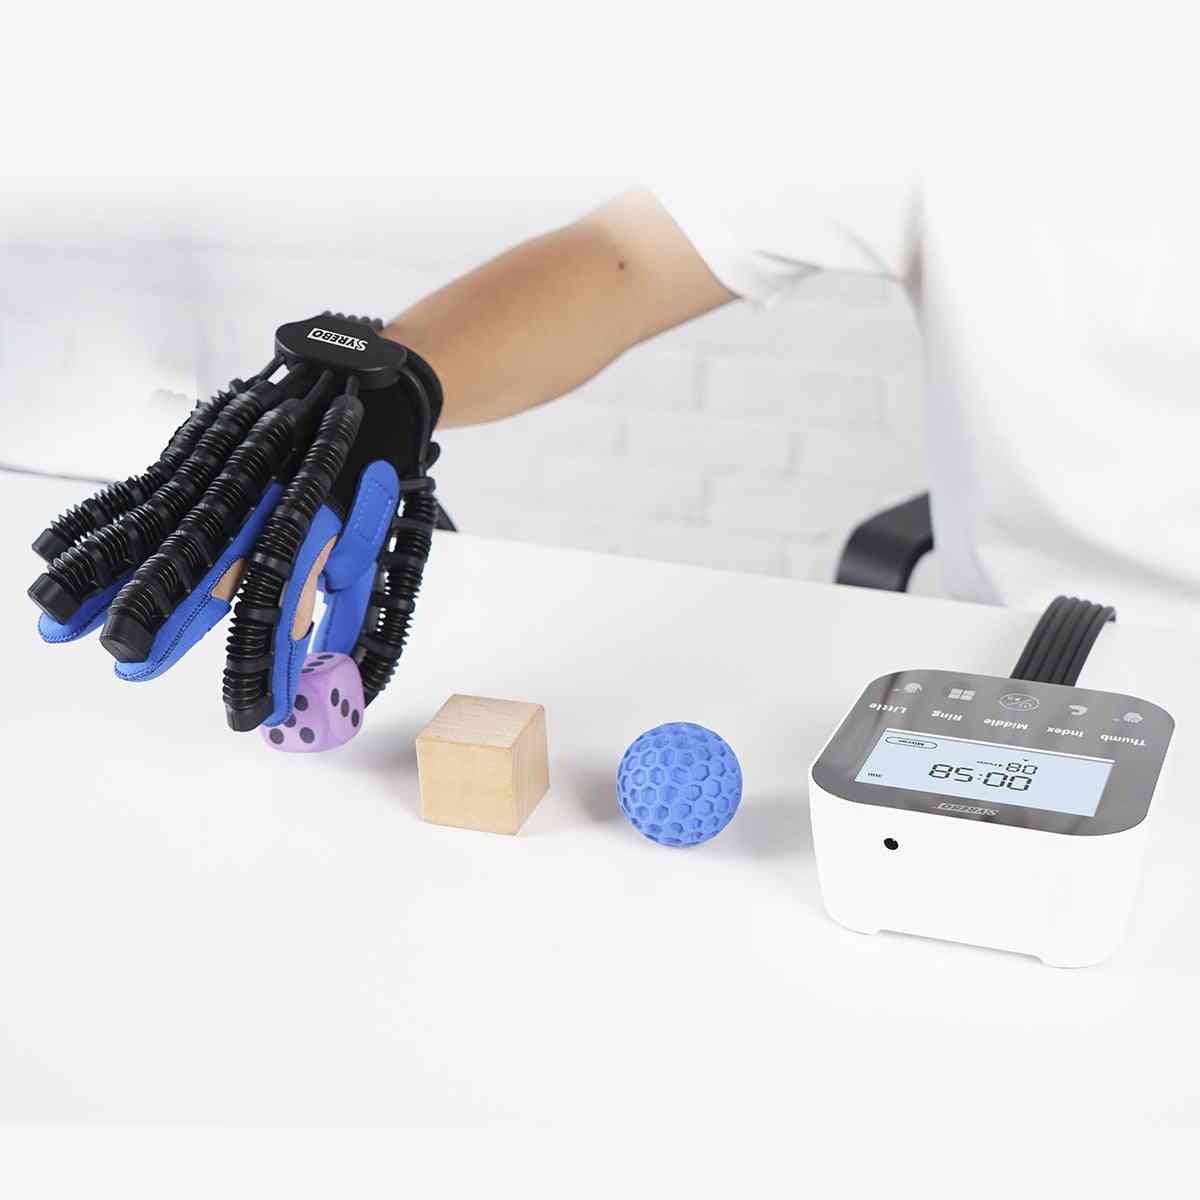 Syrebo C12 Hand Therapy Gloves for Stroke Patients Without Host